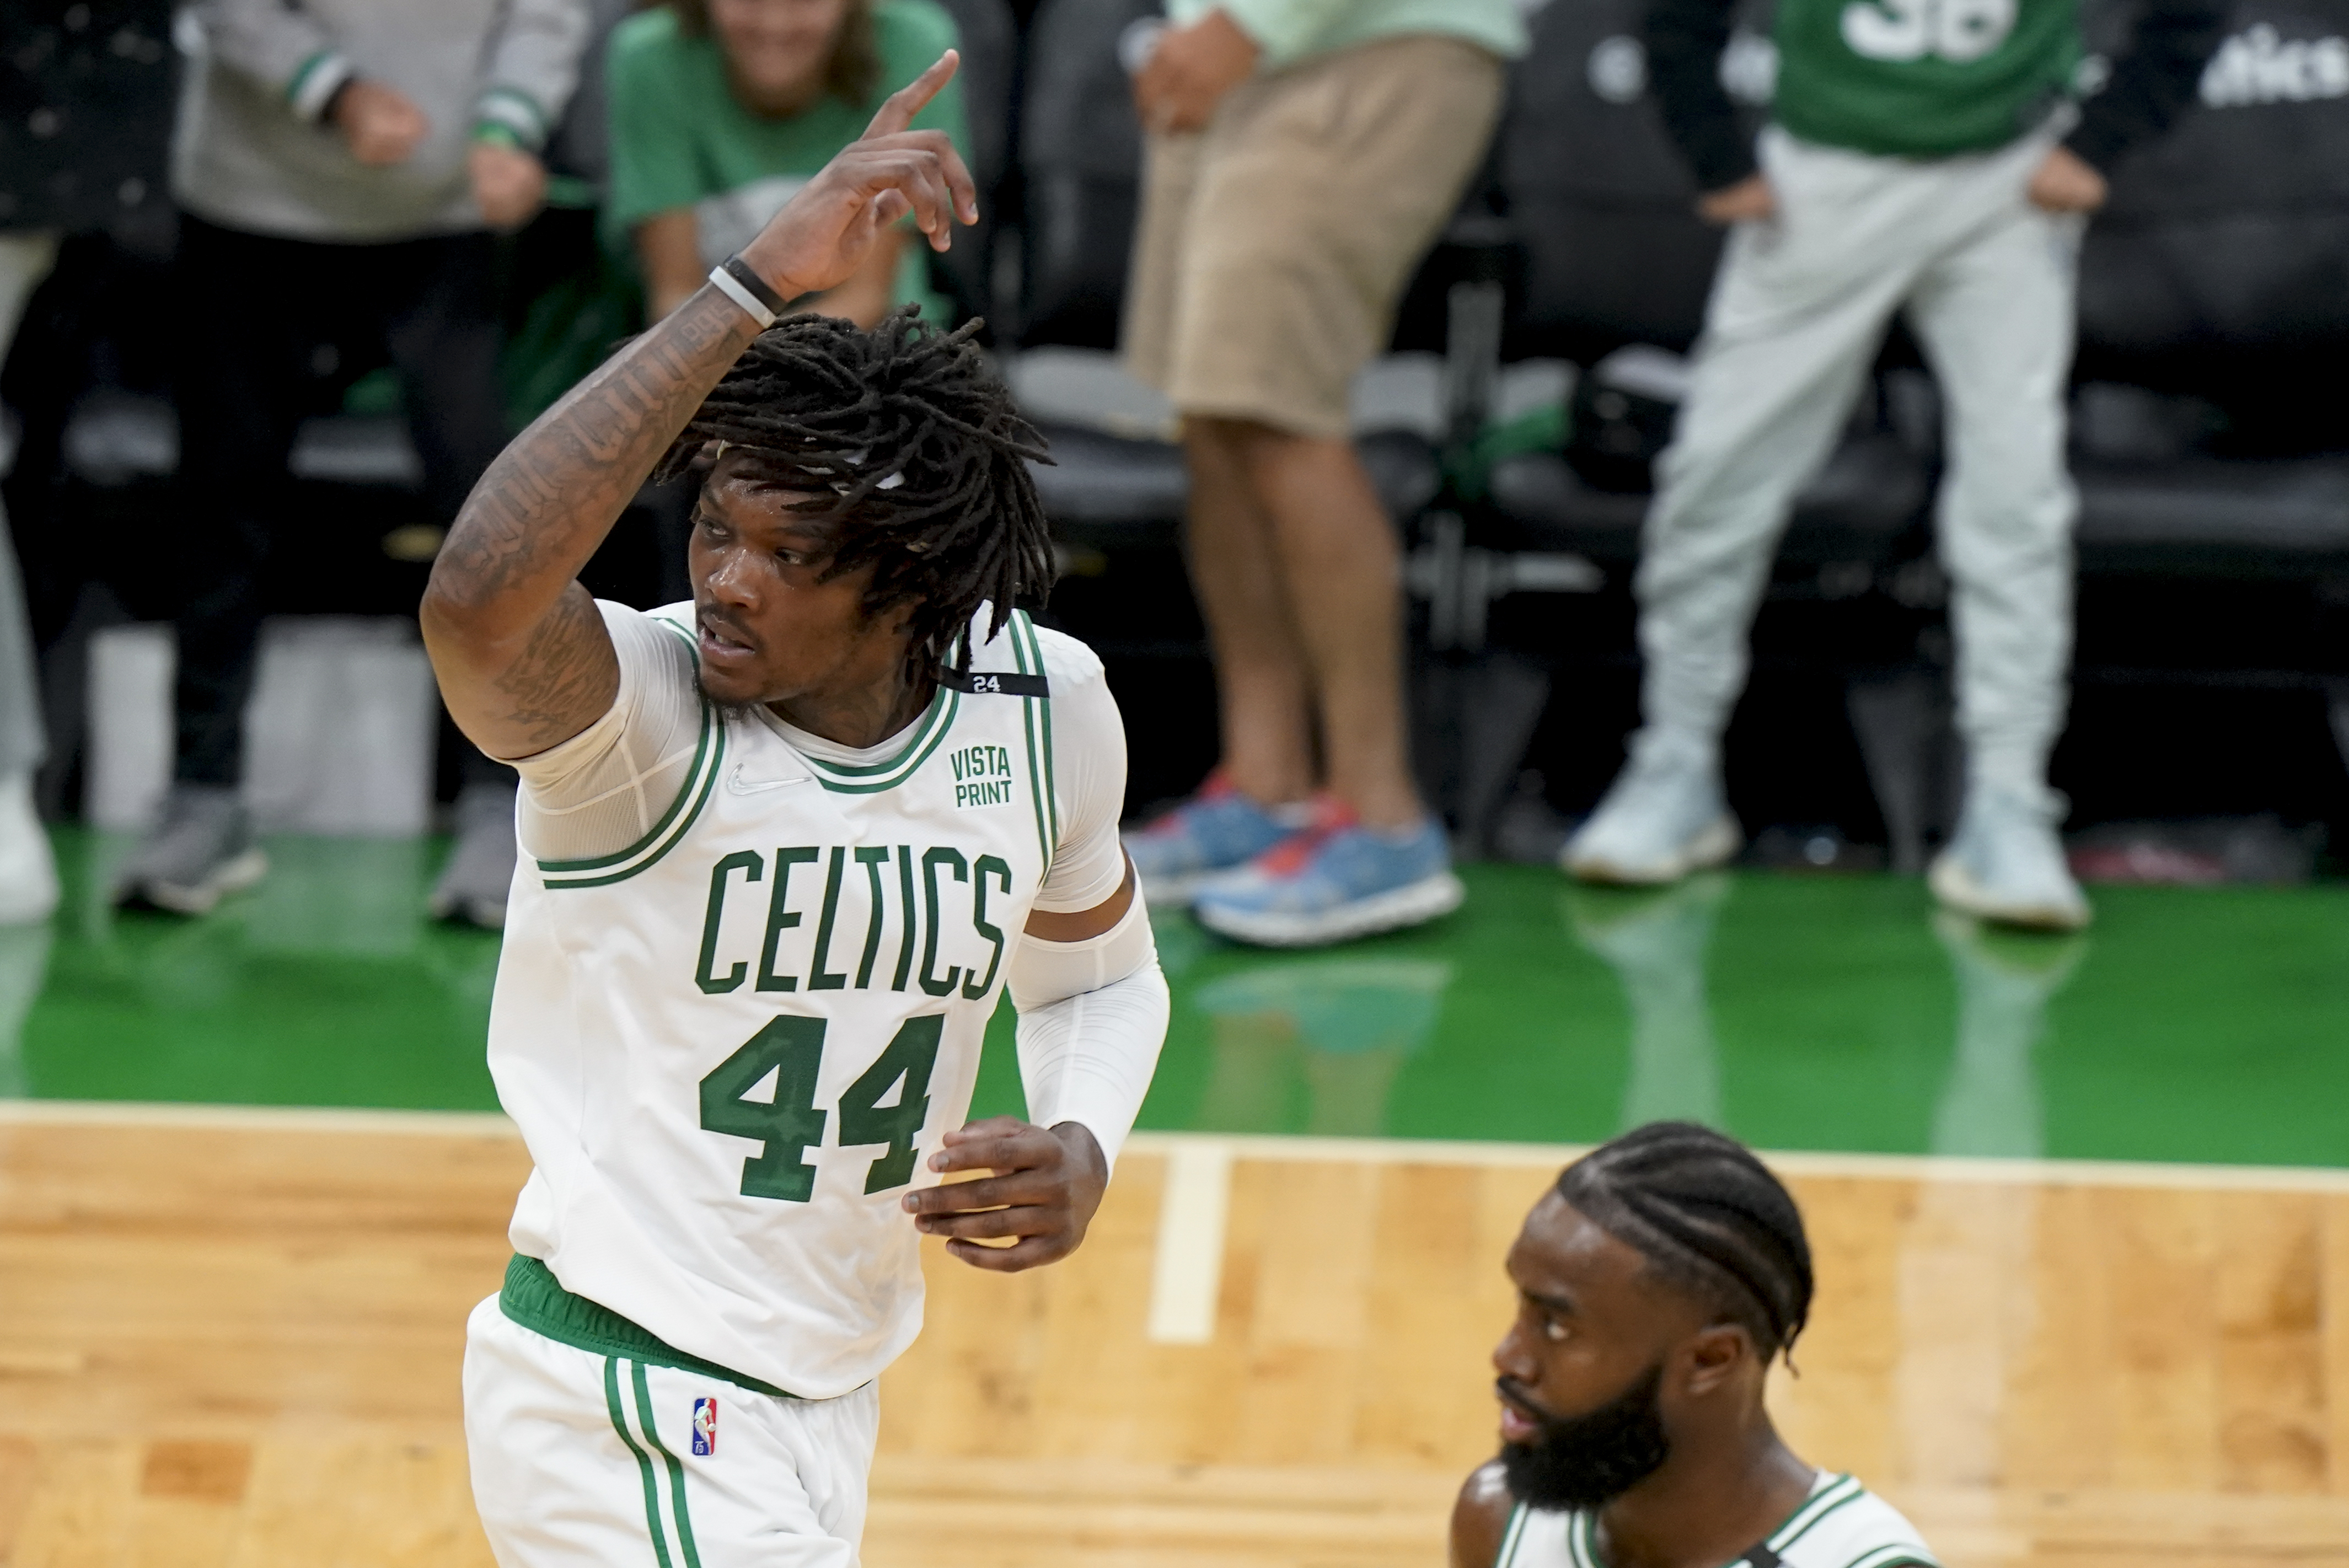 Celtics' Robert Williams expected to miss 8-12 weeks after surgery